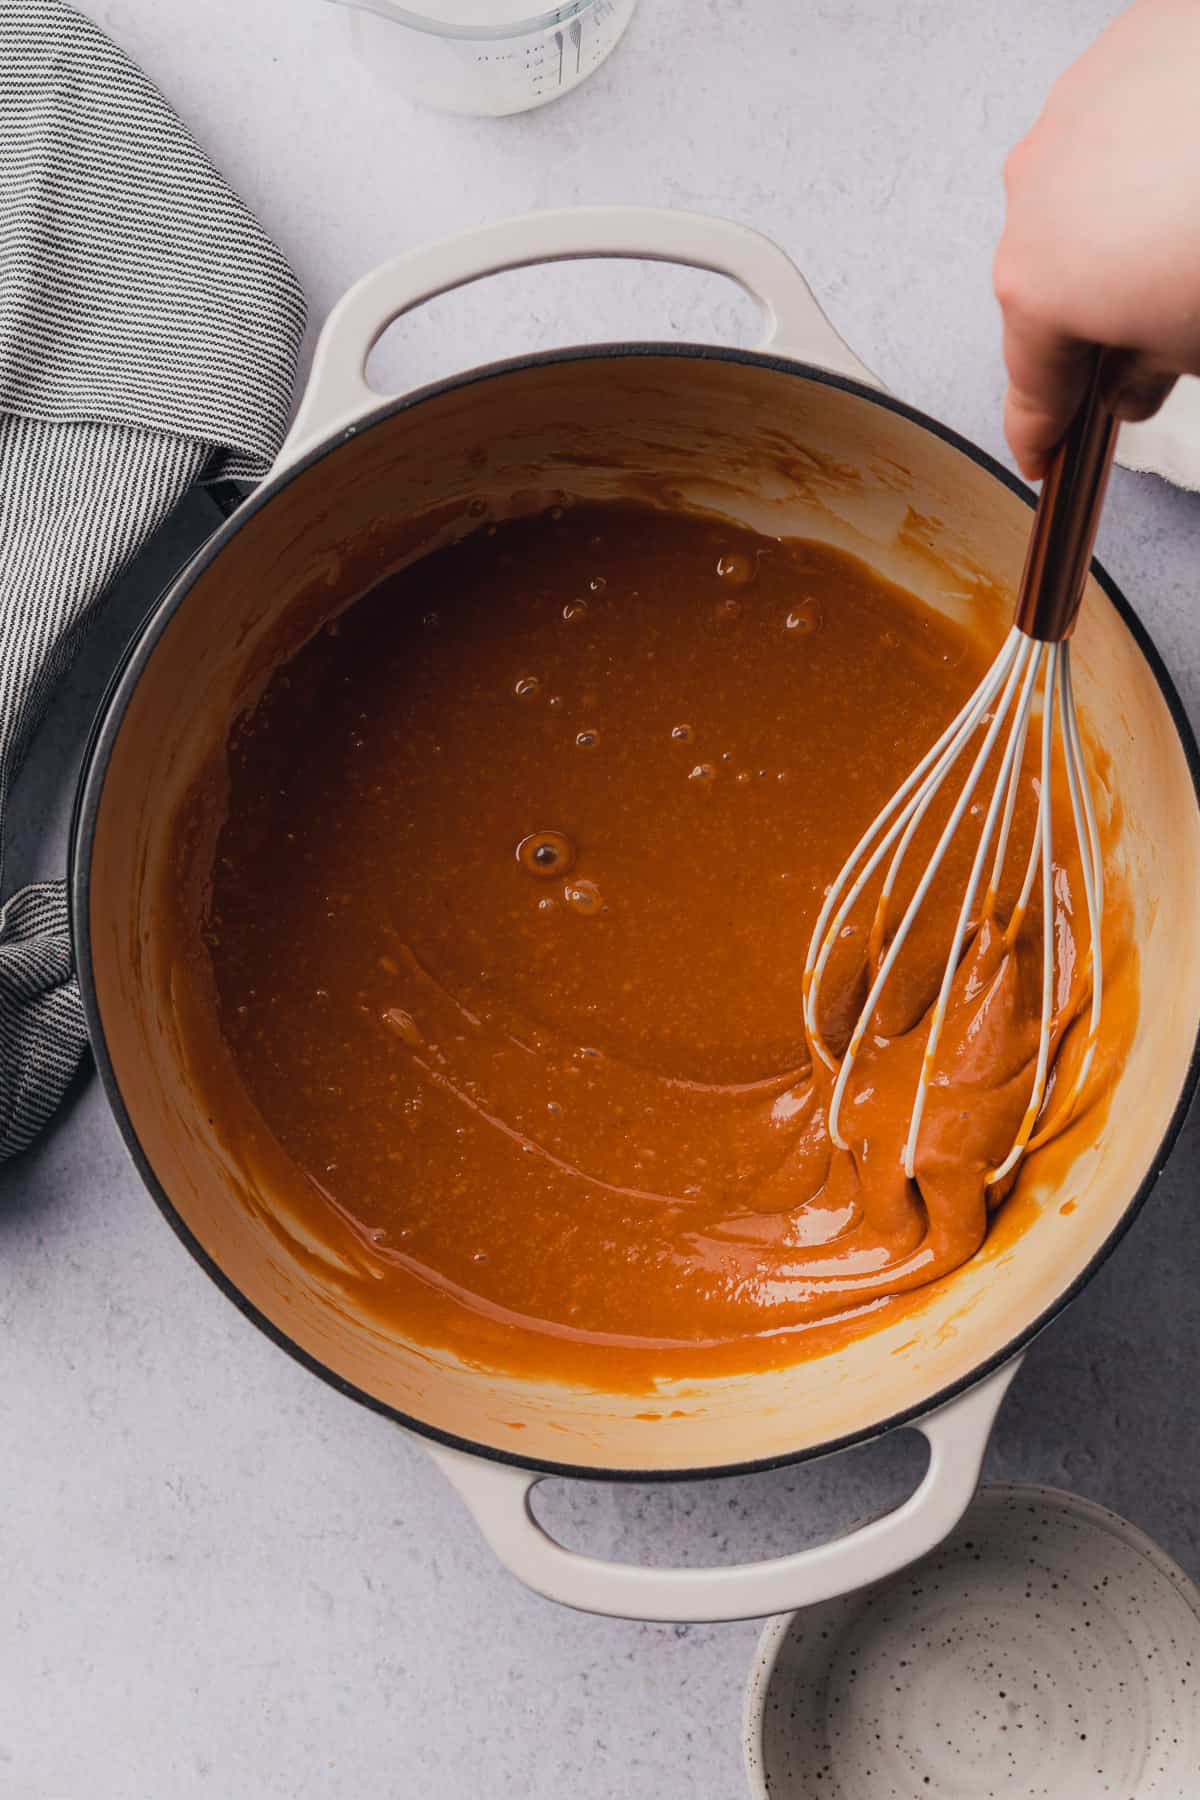 whisking caramel together in an enameled dutch oven